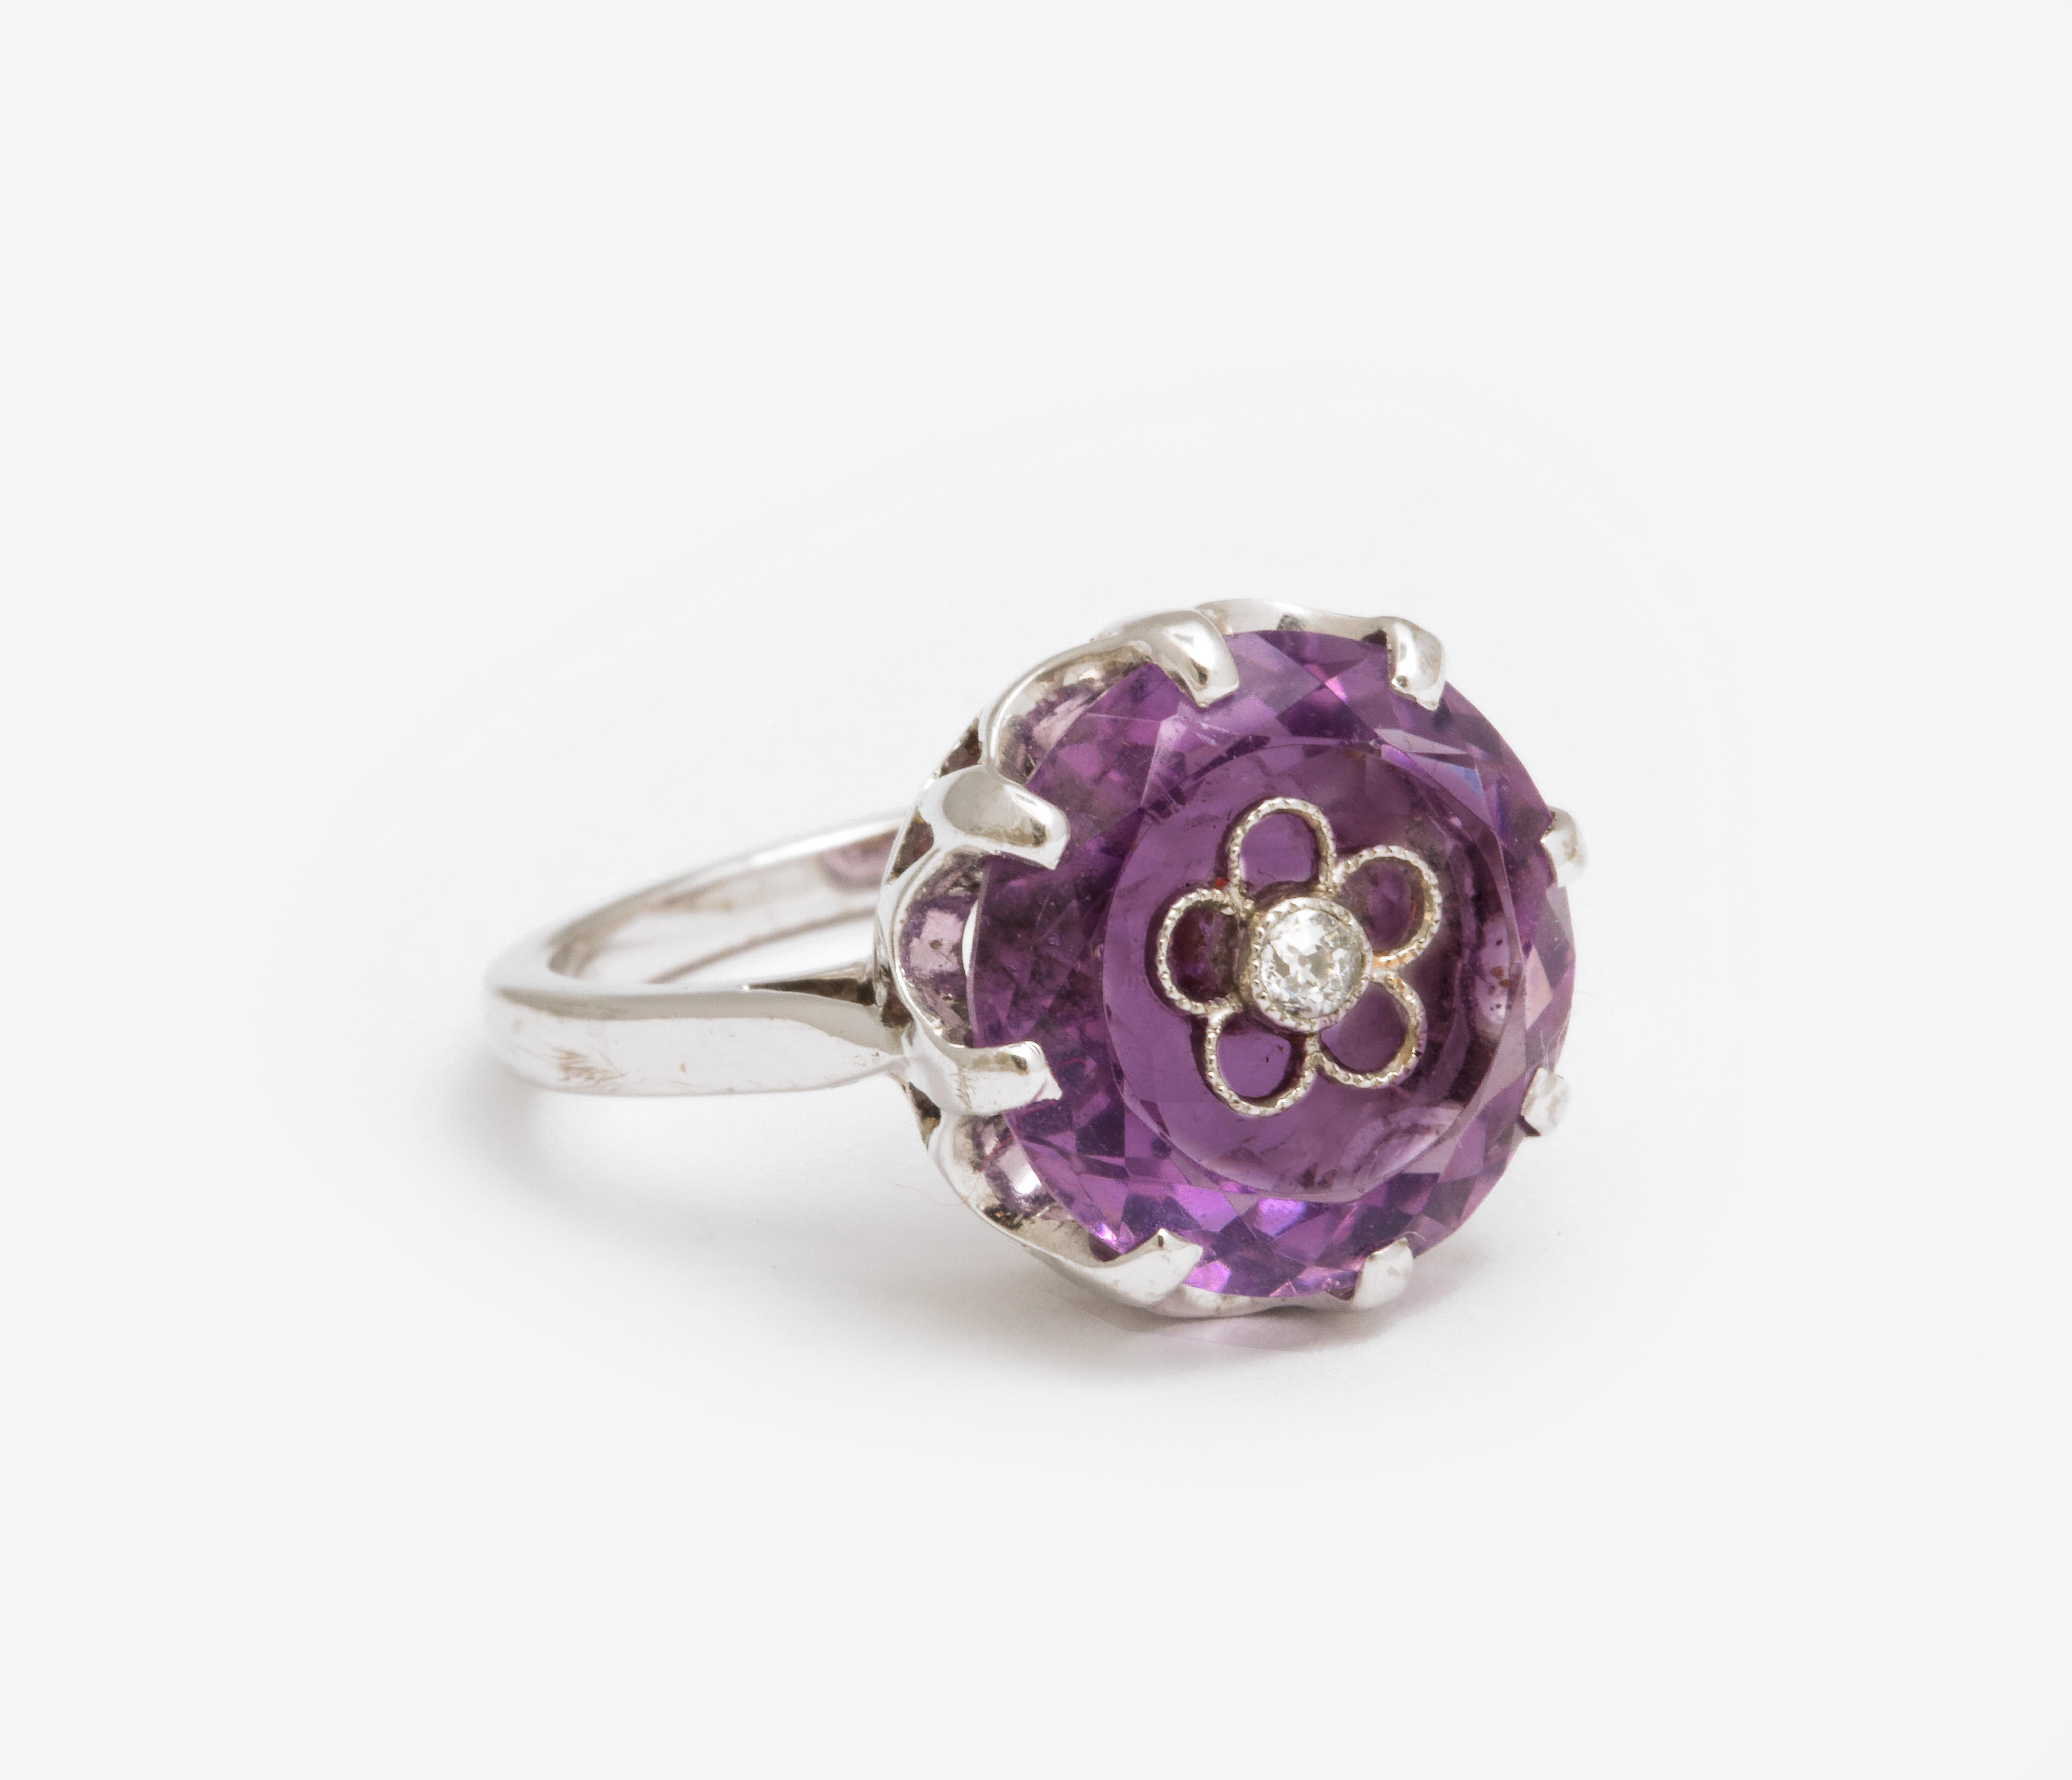 An Art Deco ring with a round 6 ct amethyst that has a posey on its wide table to signify 